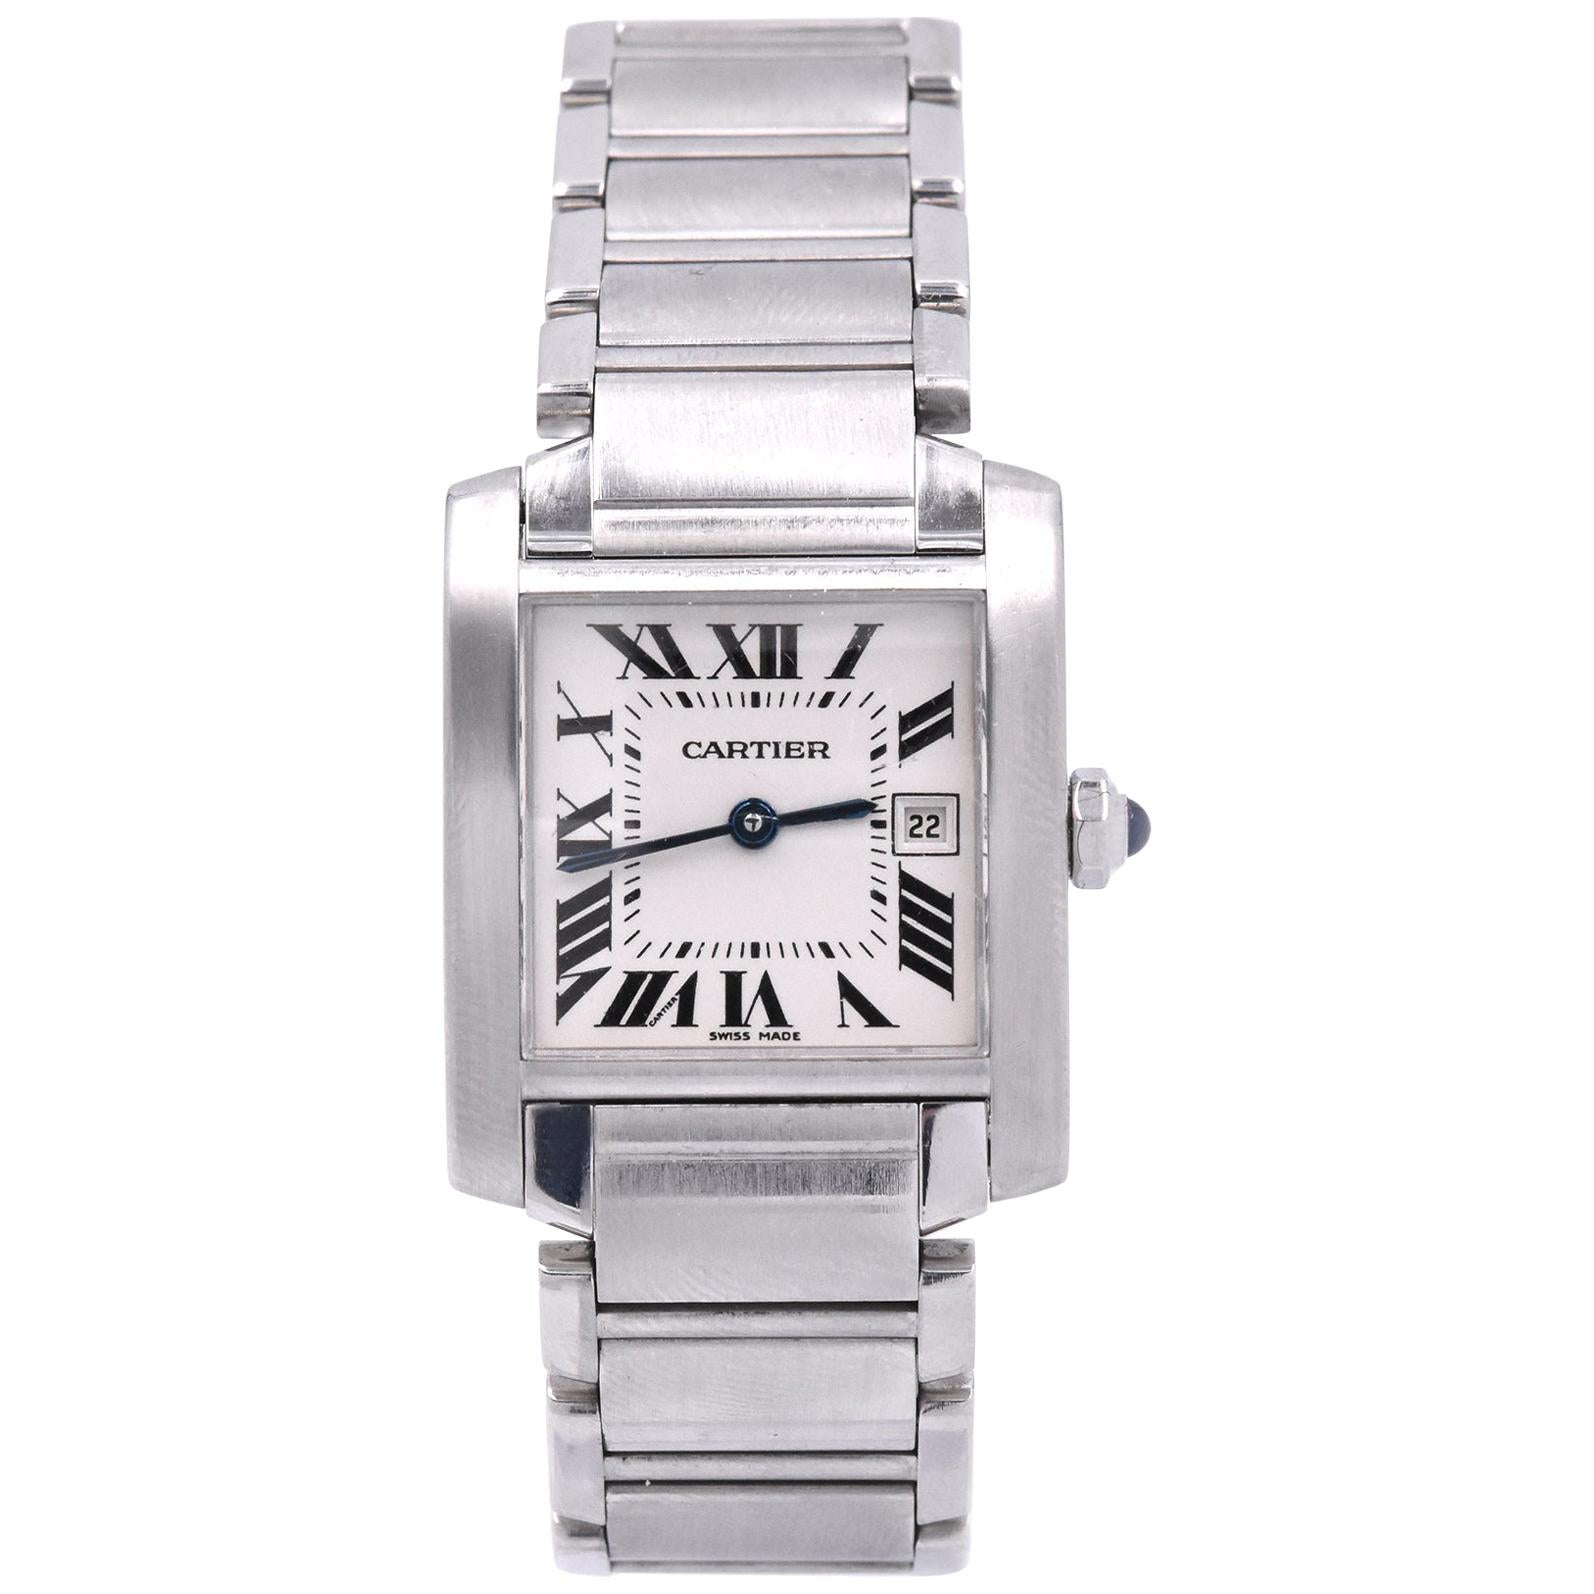 Cartier Midsize Tank Francaise Stainless Steel Watch Ref. 2465